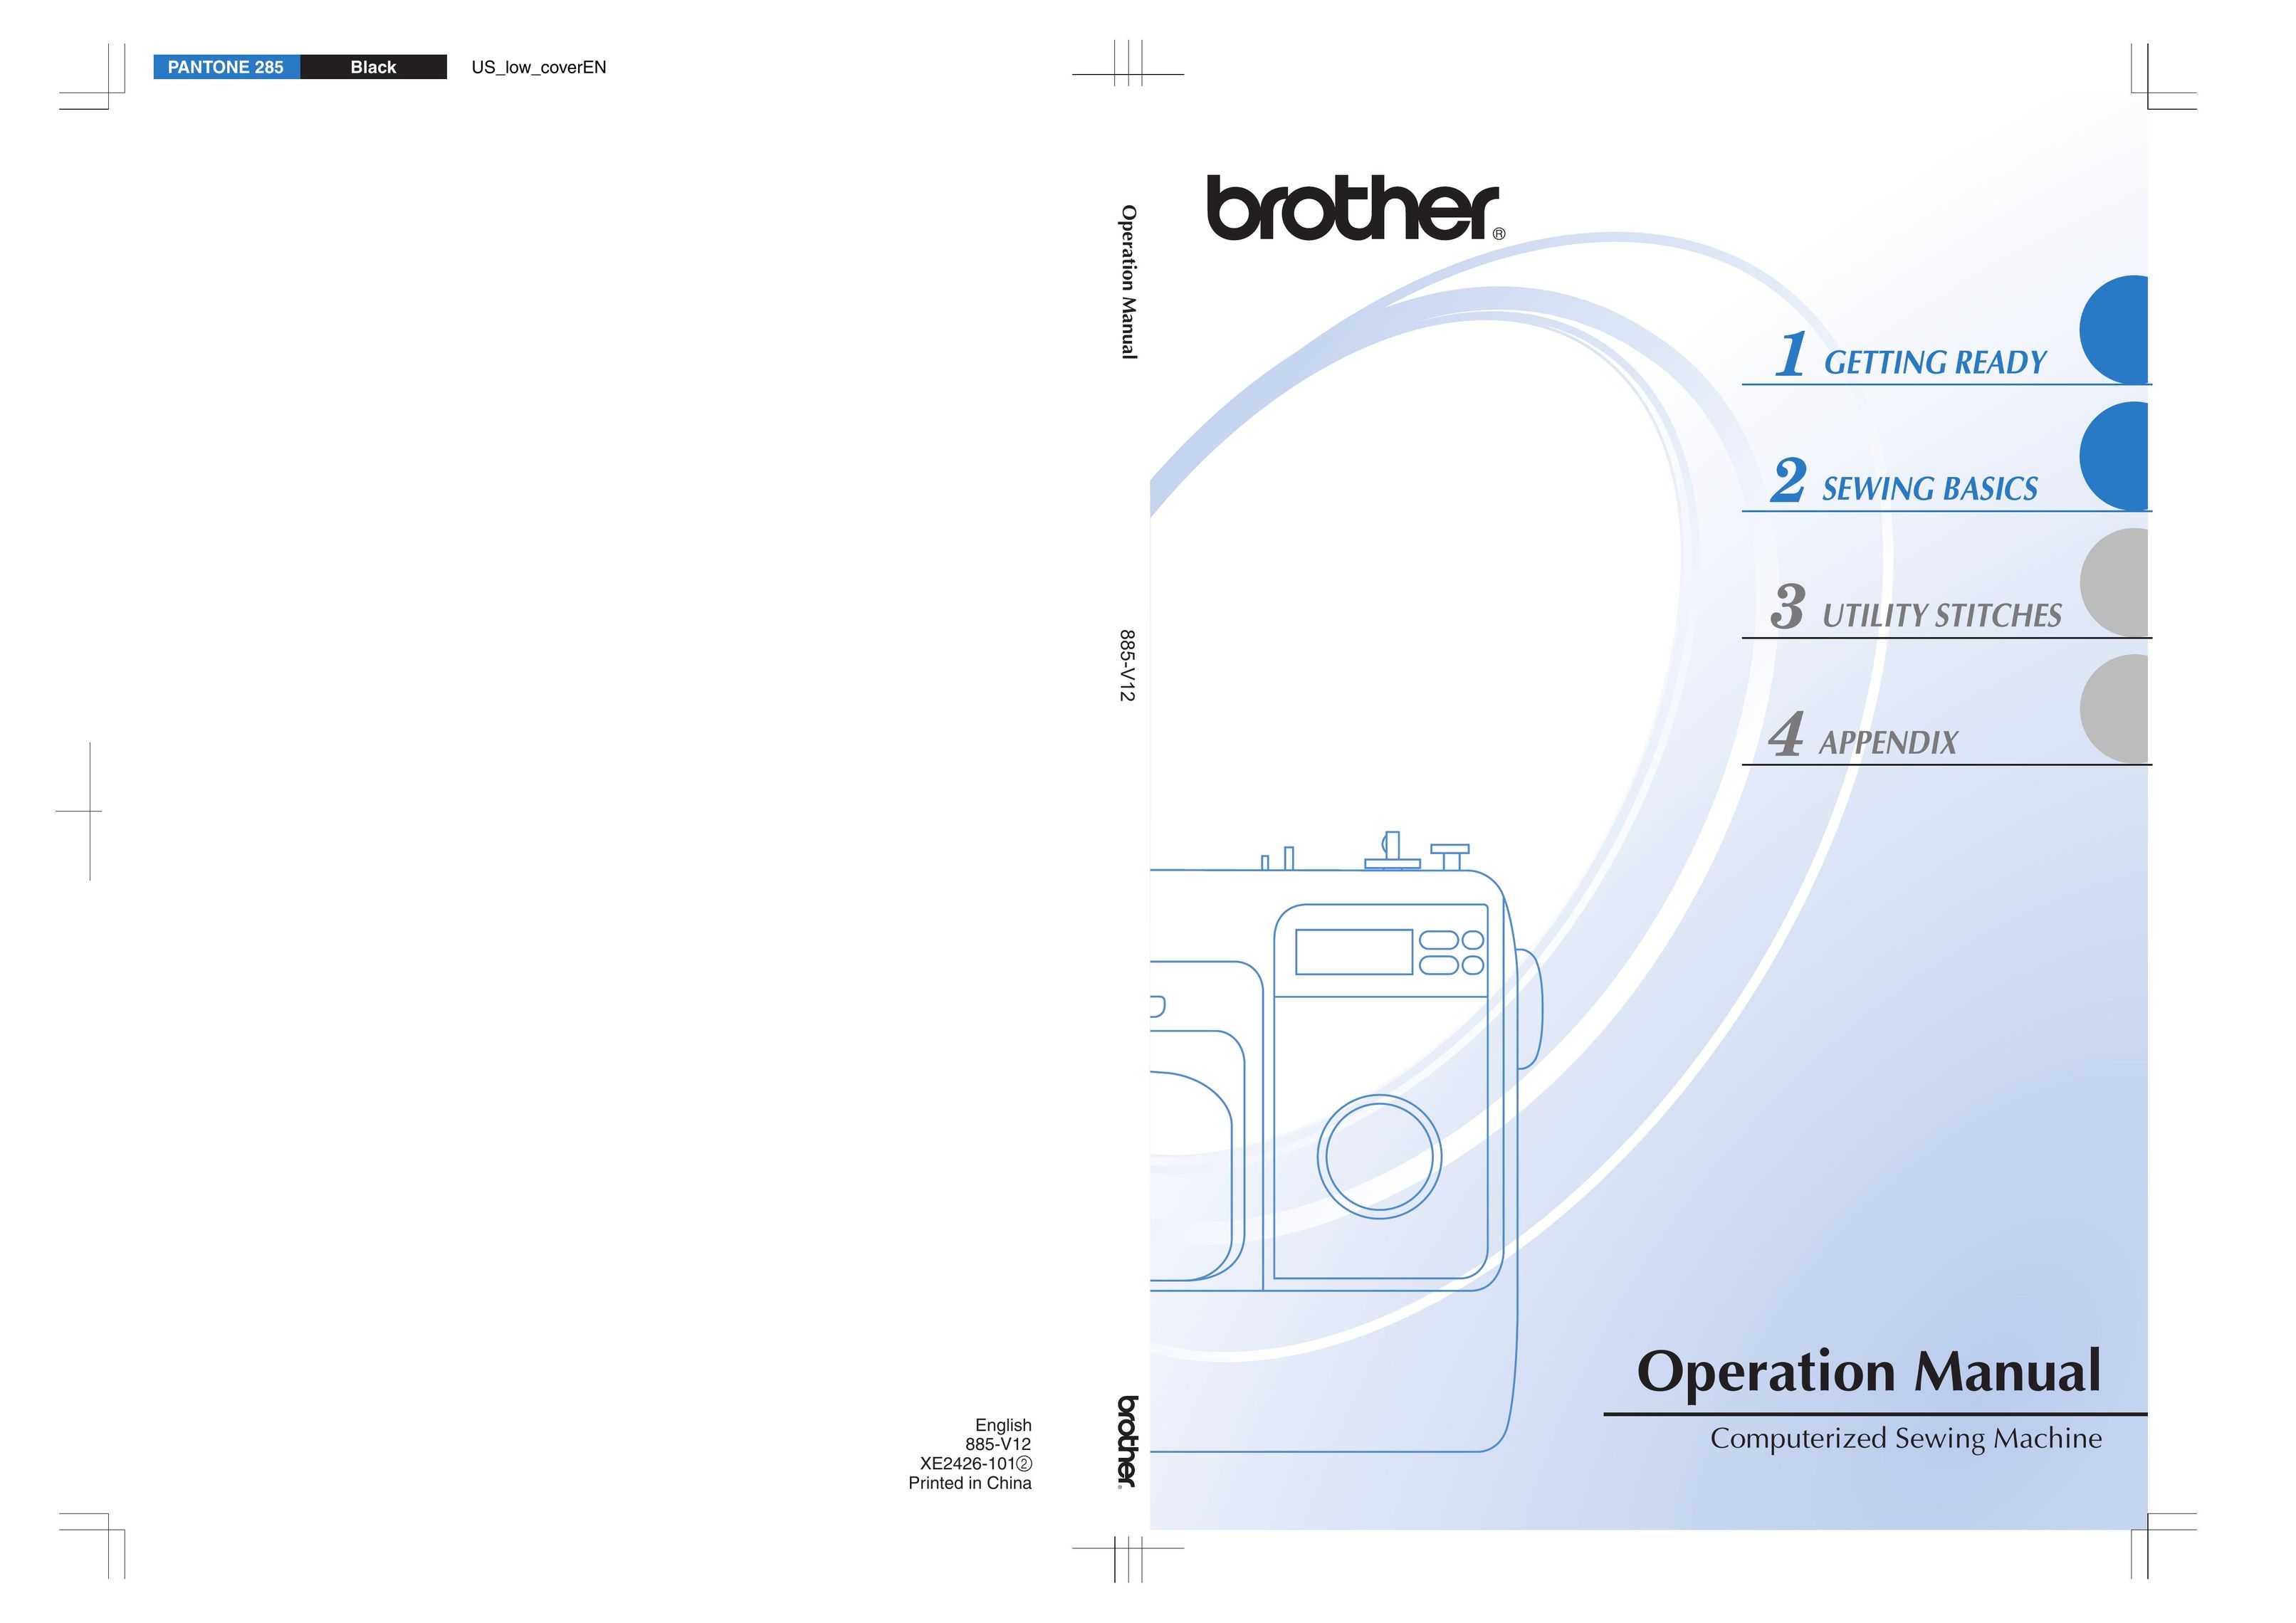 Brother 885-V12 Sewing Machine User Manual